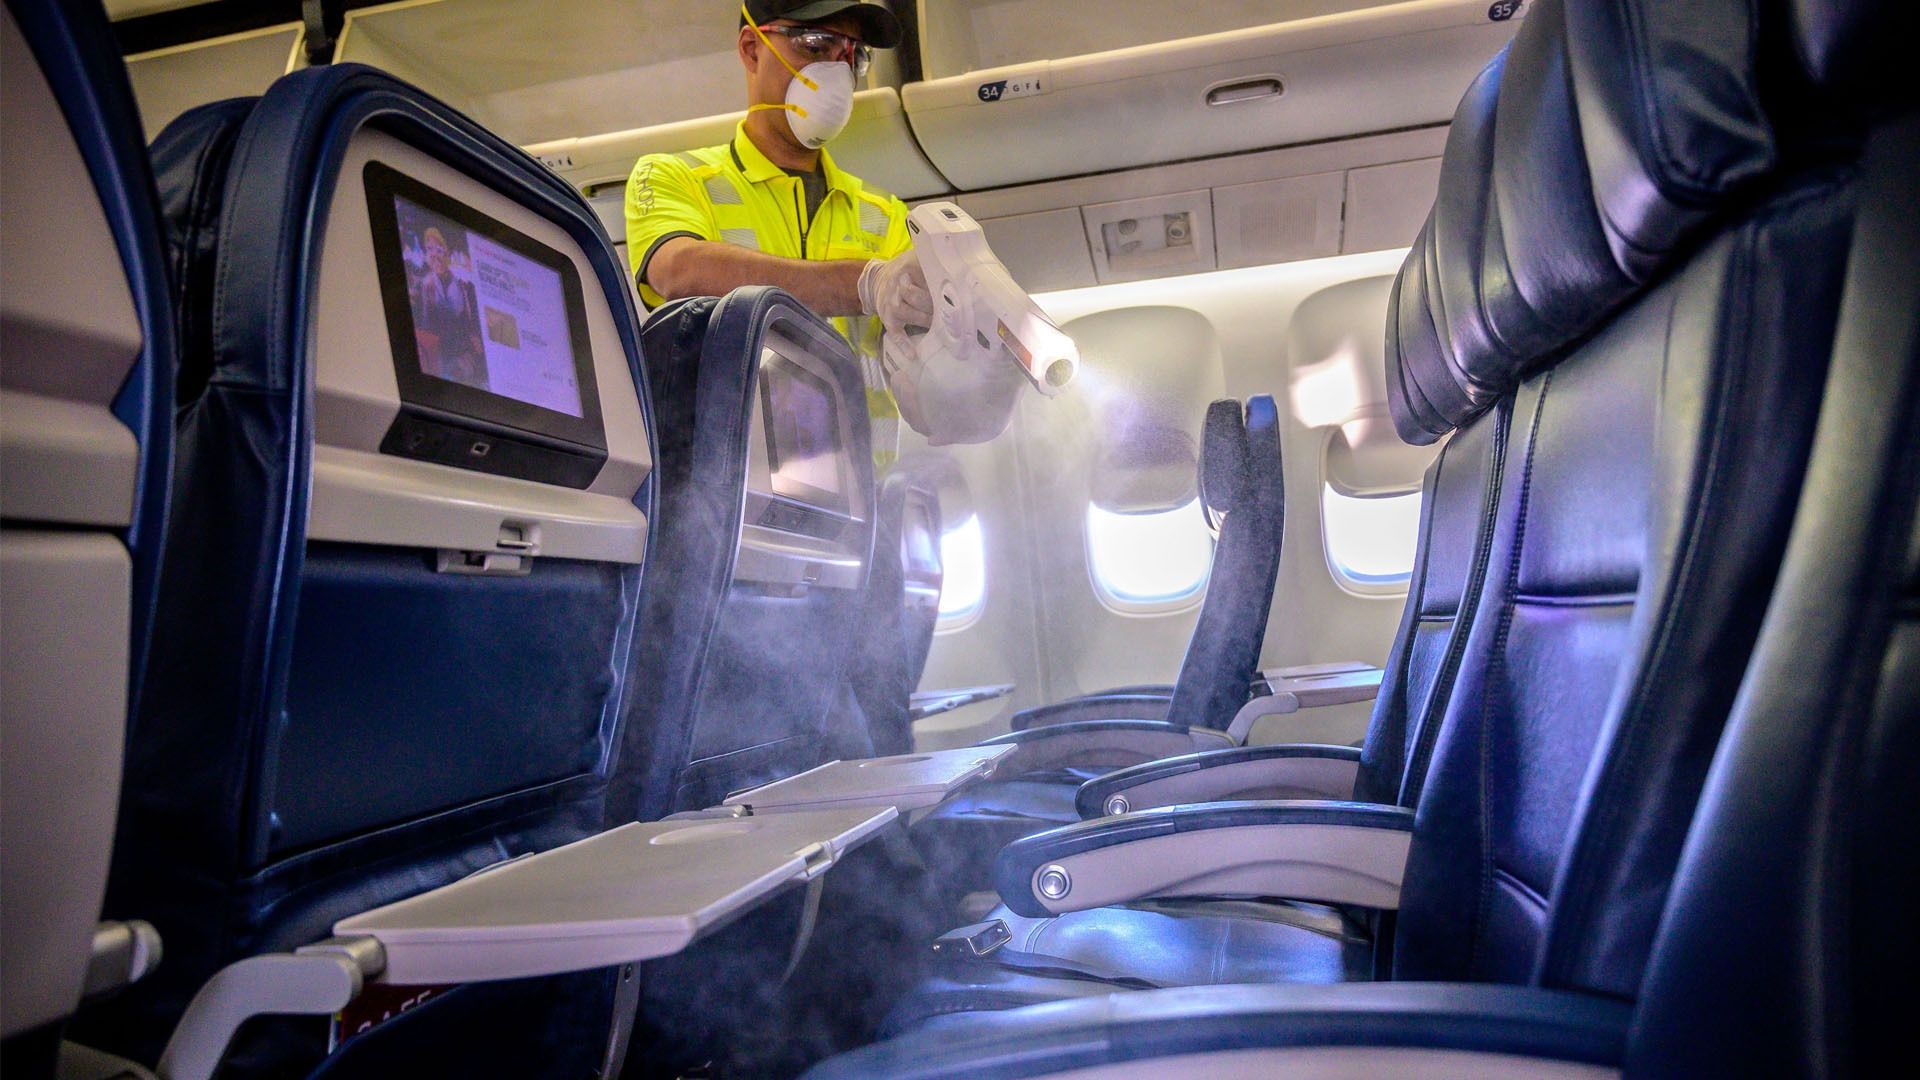 Image of Delta Air Lines worker spraying disinfectant on passenger seats.